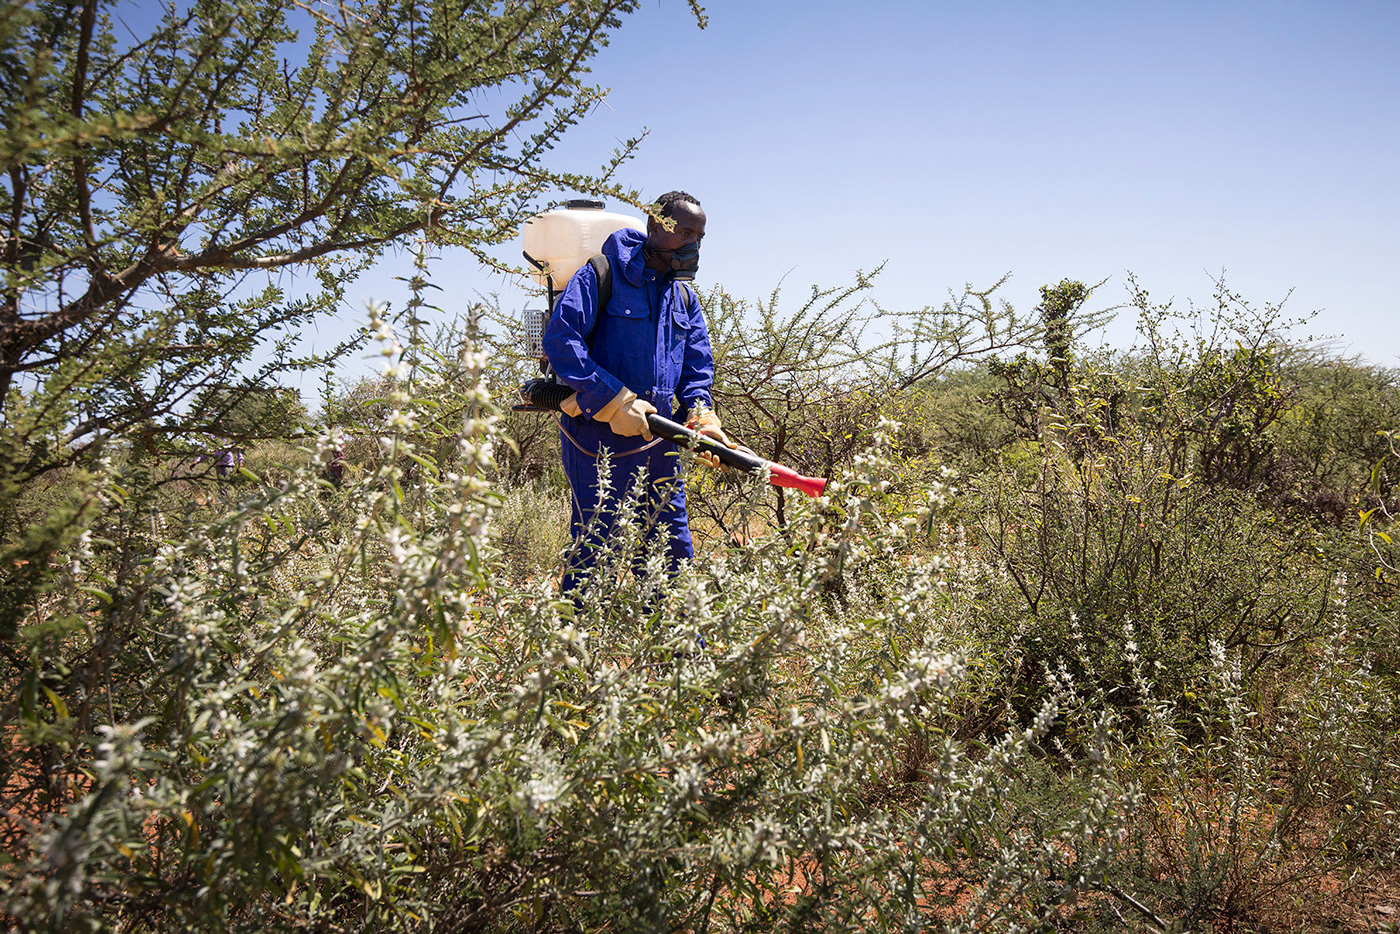 A government staff member of the Ethiopian ministry of Agriculture spraying against locusts in the Somali region of Ethiopia. Credit: FAO/Petterik Wiggers